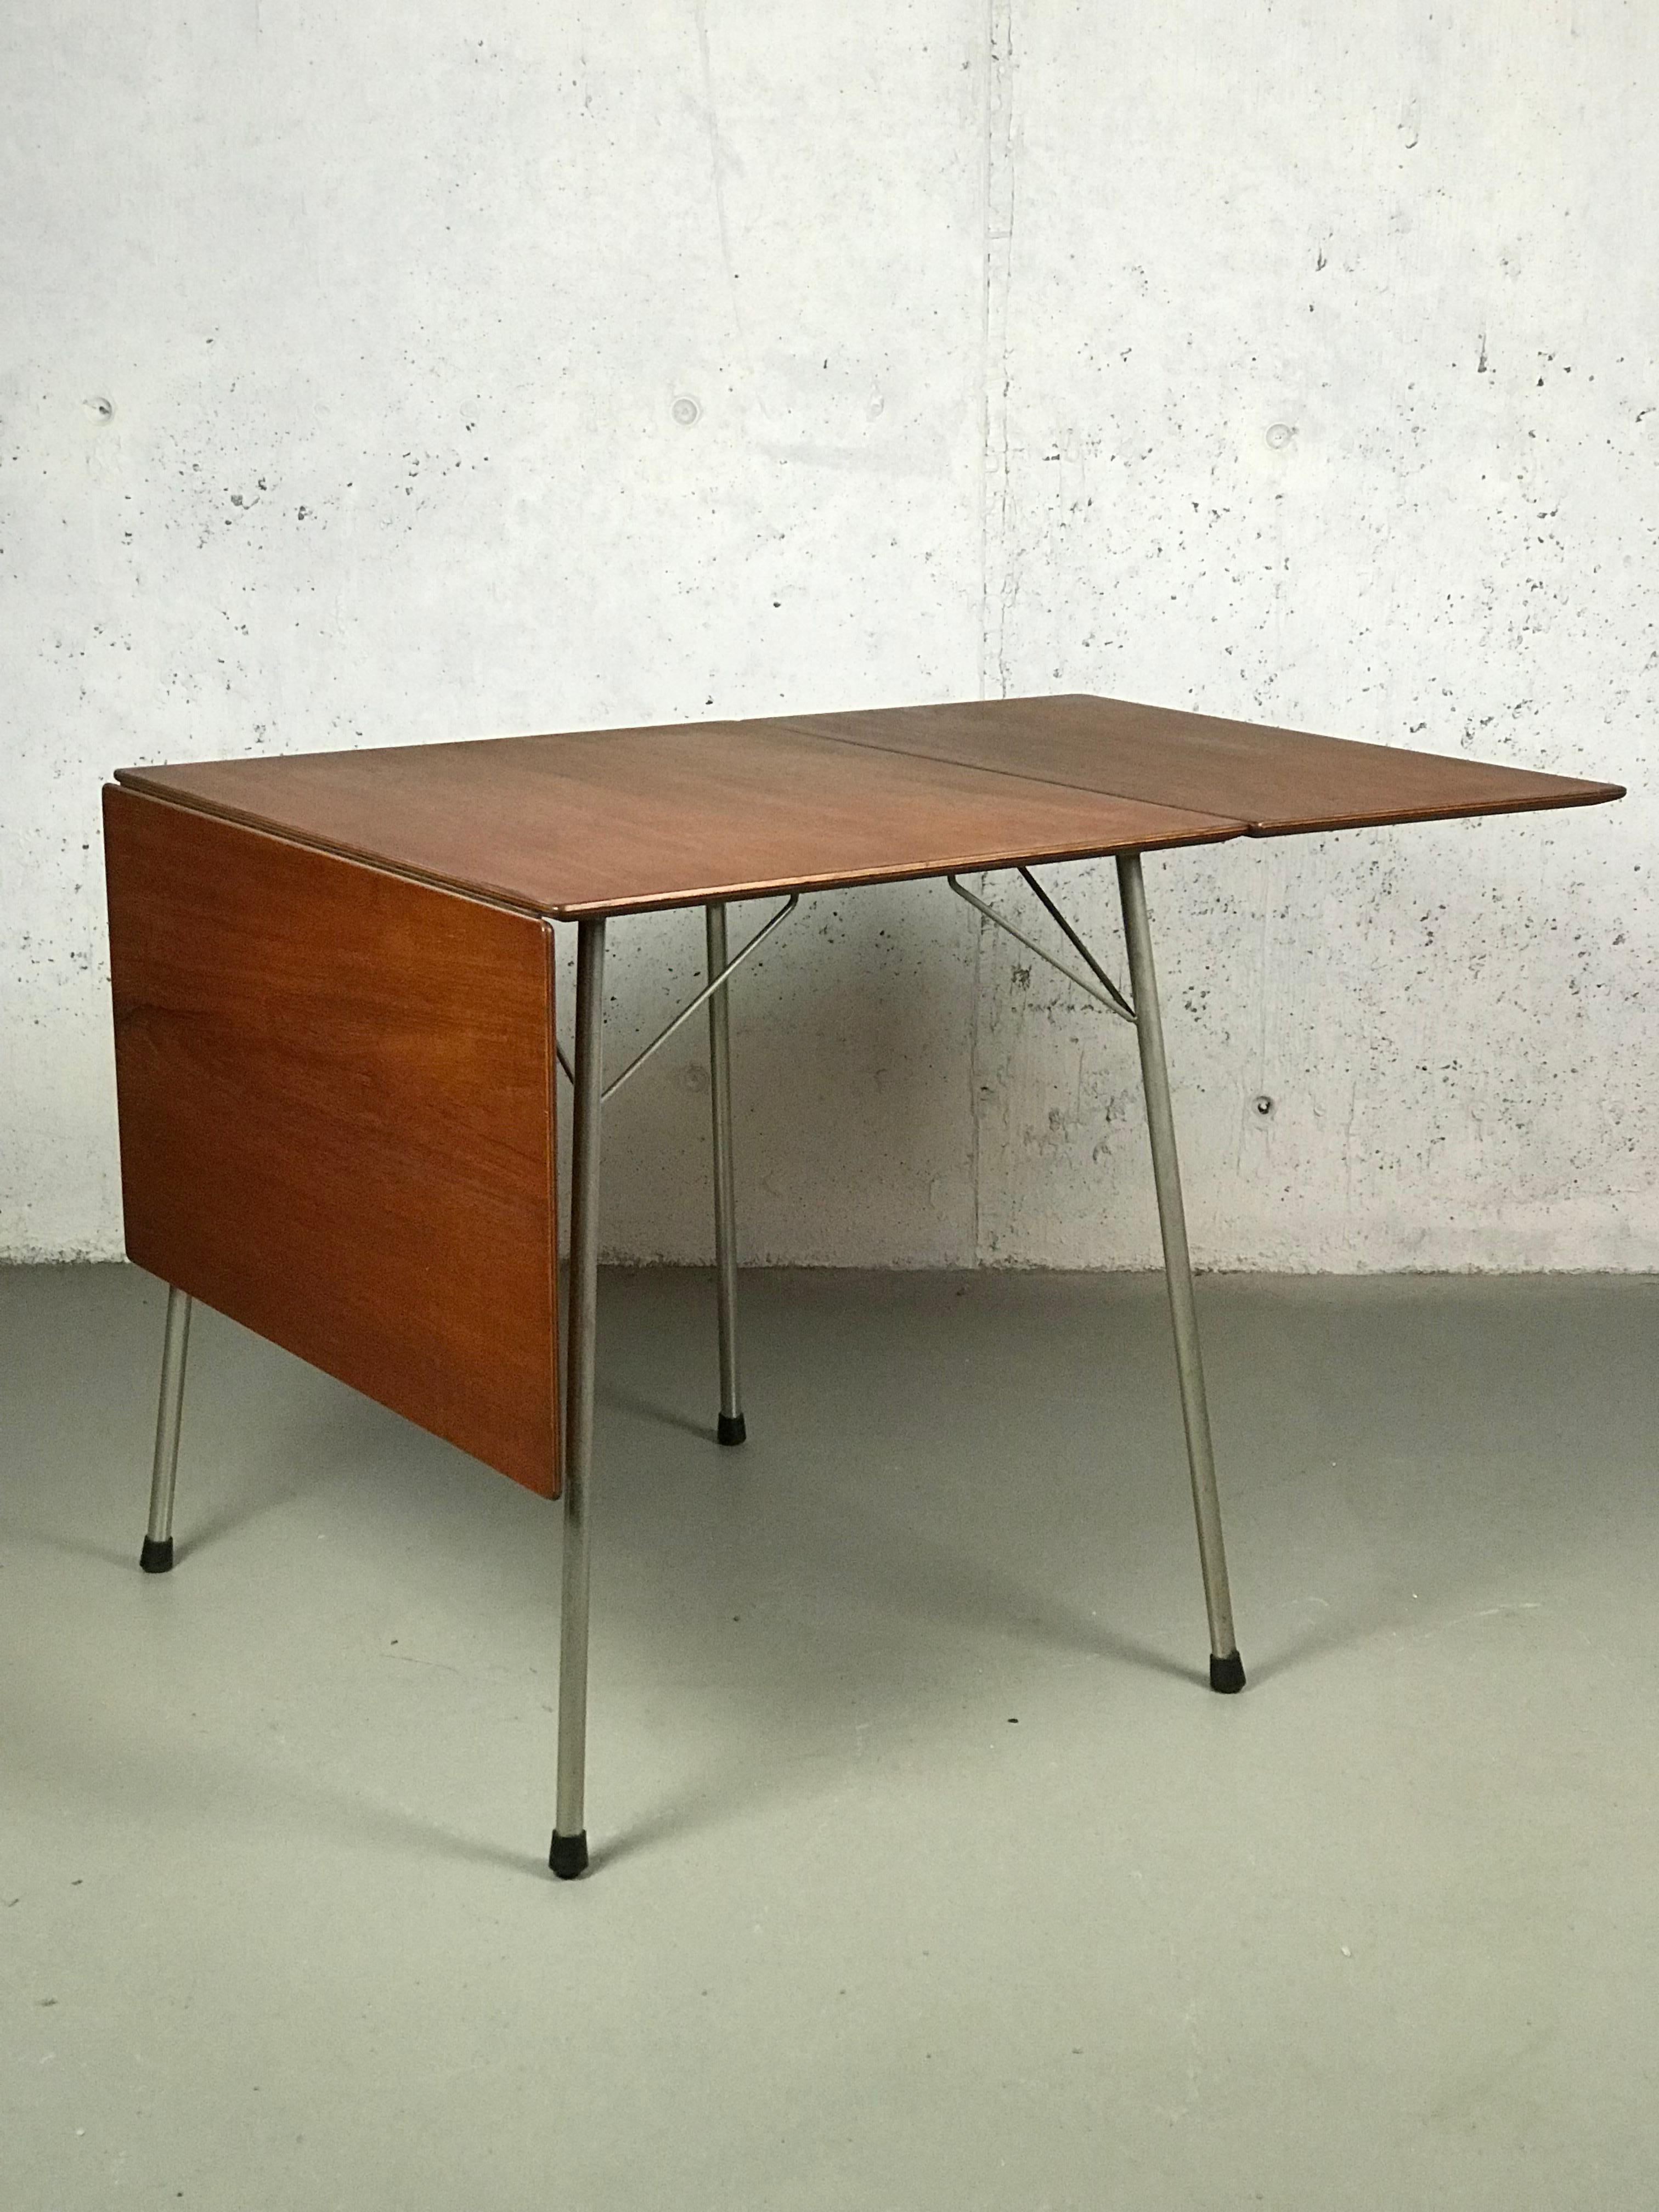 Sleek and petite Minimalist Danish teak drop-leaf dining table by Arne Jacobsen for Fritz Hansen; Model 3601. The top has been restored with a Danish oil finish. The legs have been cleaned but small spots of oxidation remain at the bottom of one leg